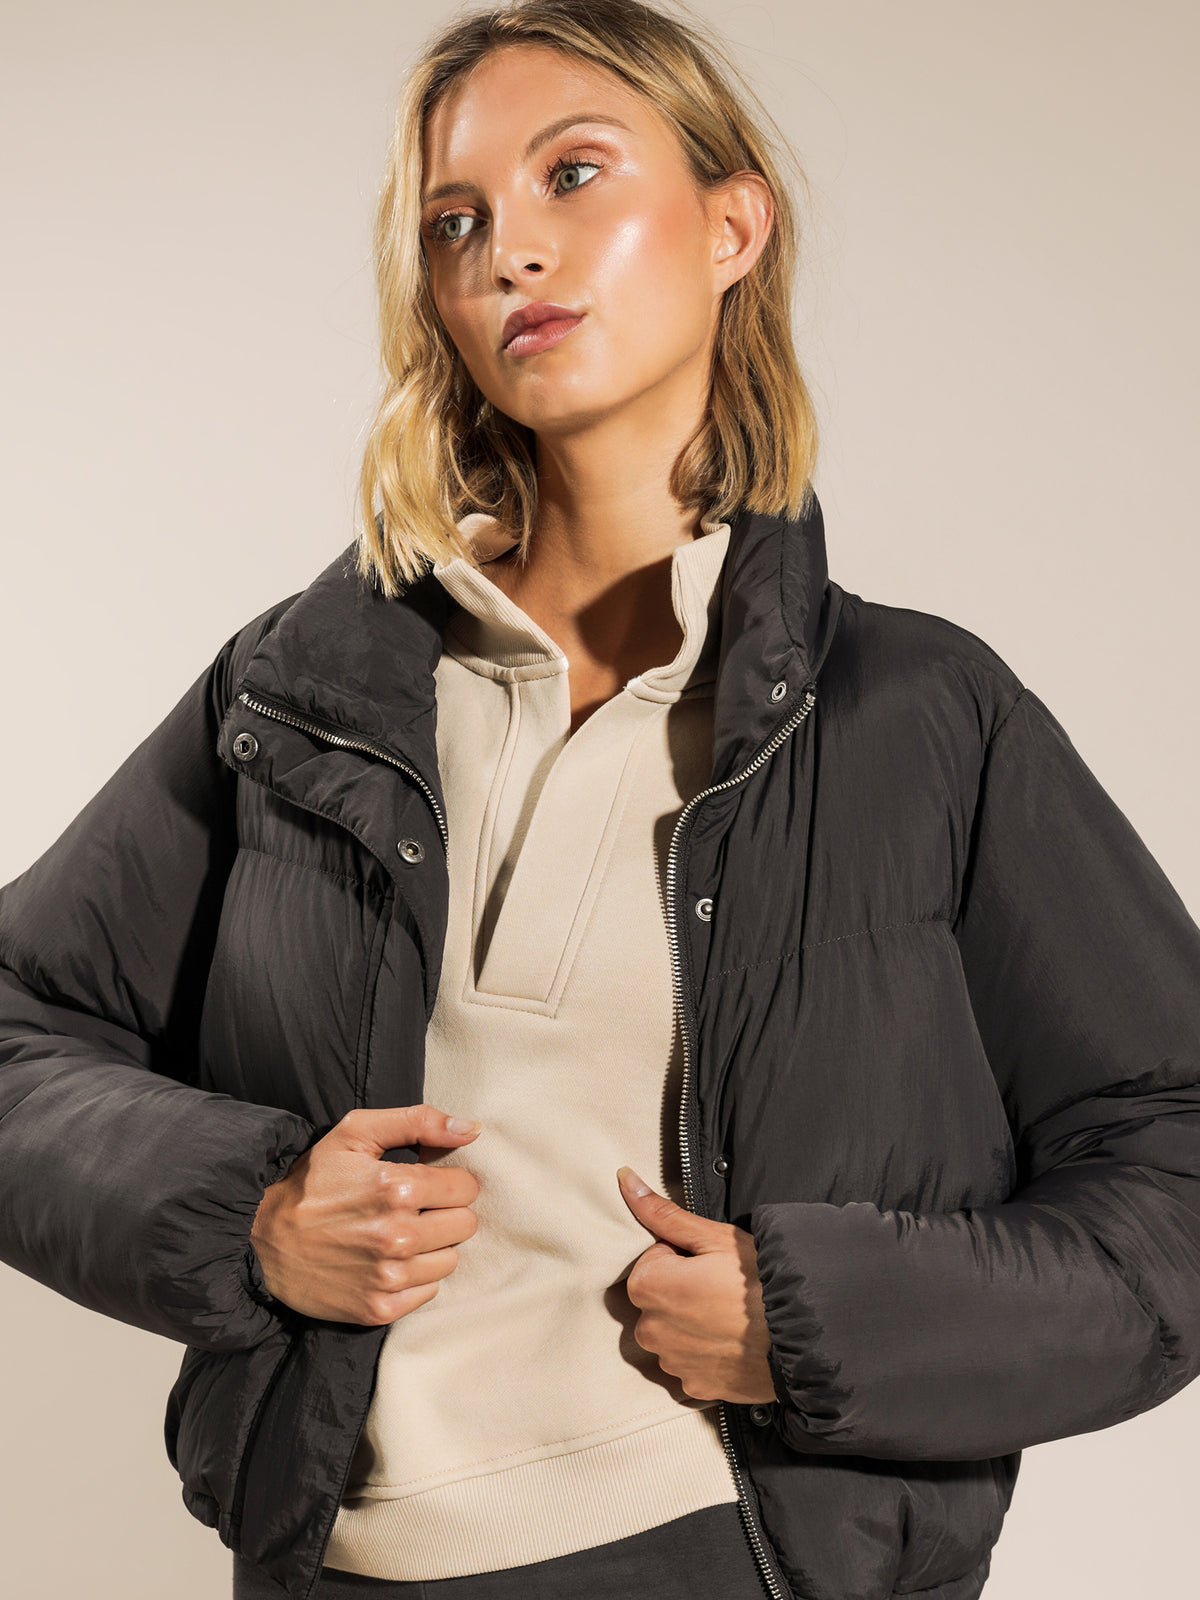 Topher Puffer Jacket in Coal